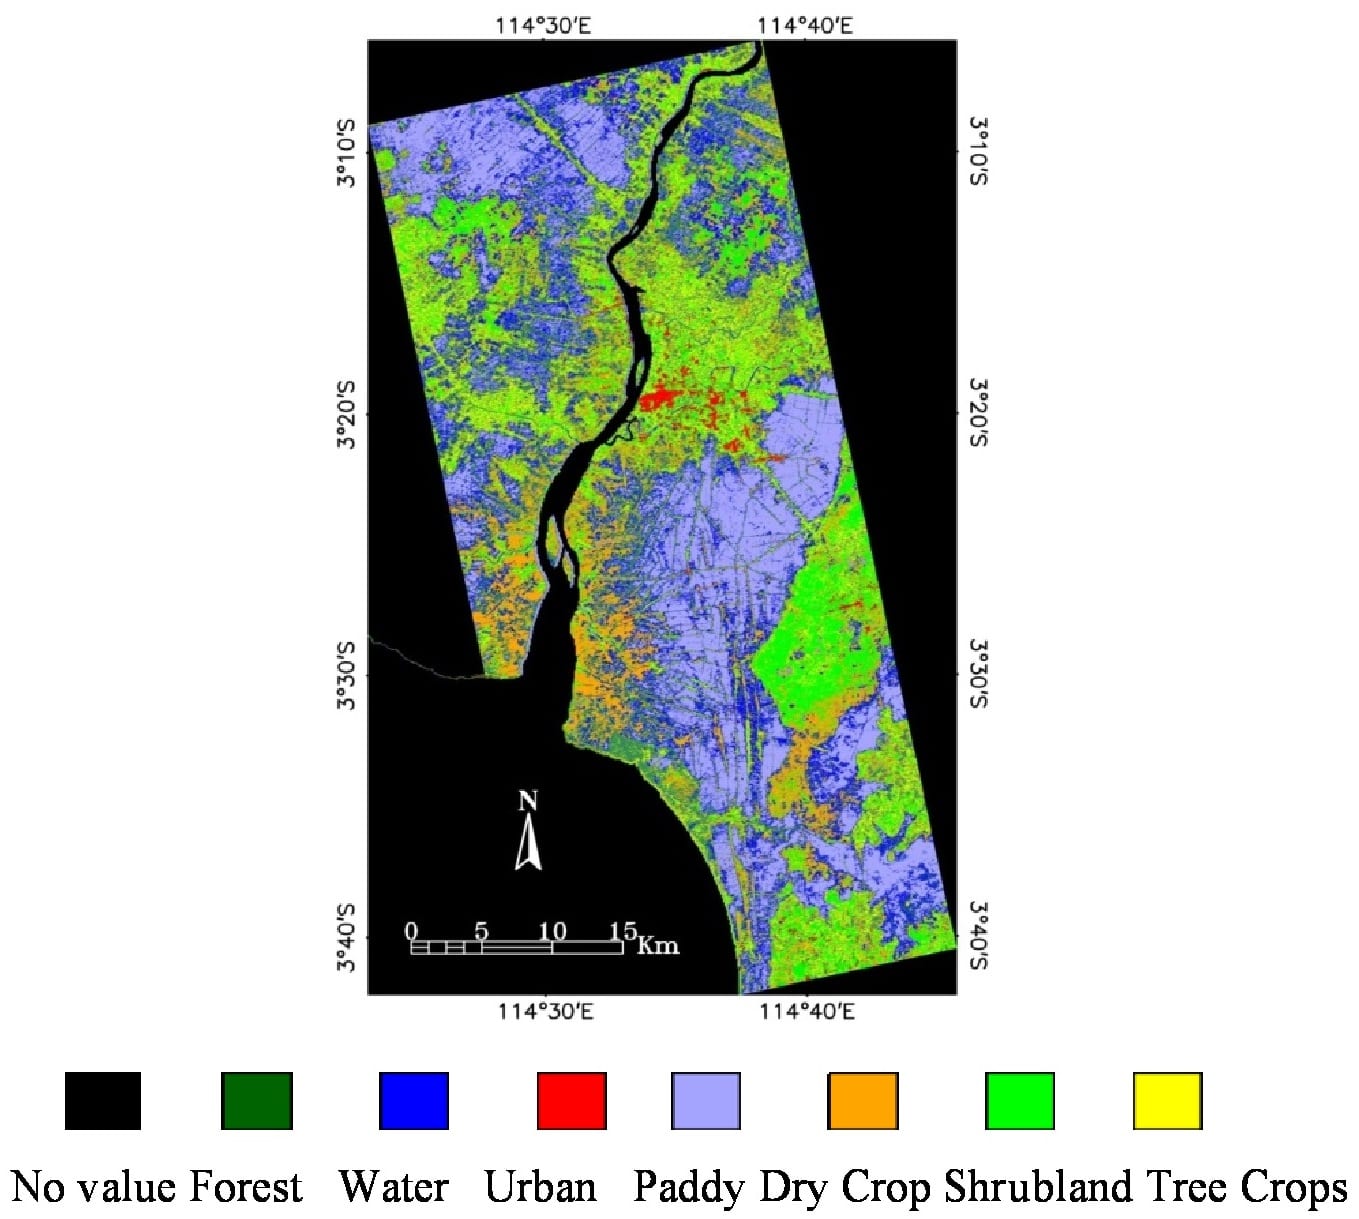 Figure 2: Land cover classification map derived from 13 bands of HH, HV, VH and VV, and the coherency T3 matrix classified by the subspace method. The overall classification accuracy is 72.4% with _¼ = 0.6762.